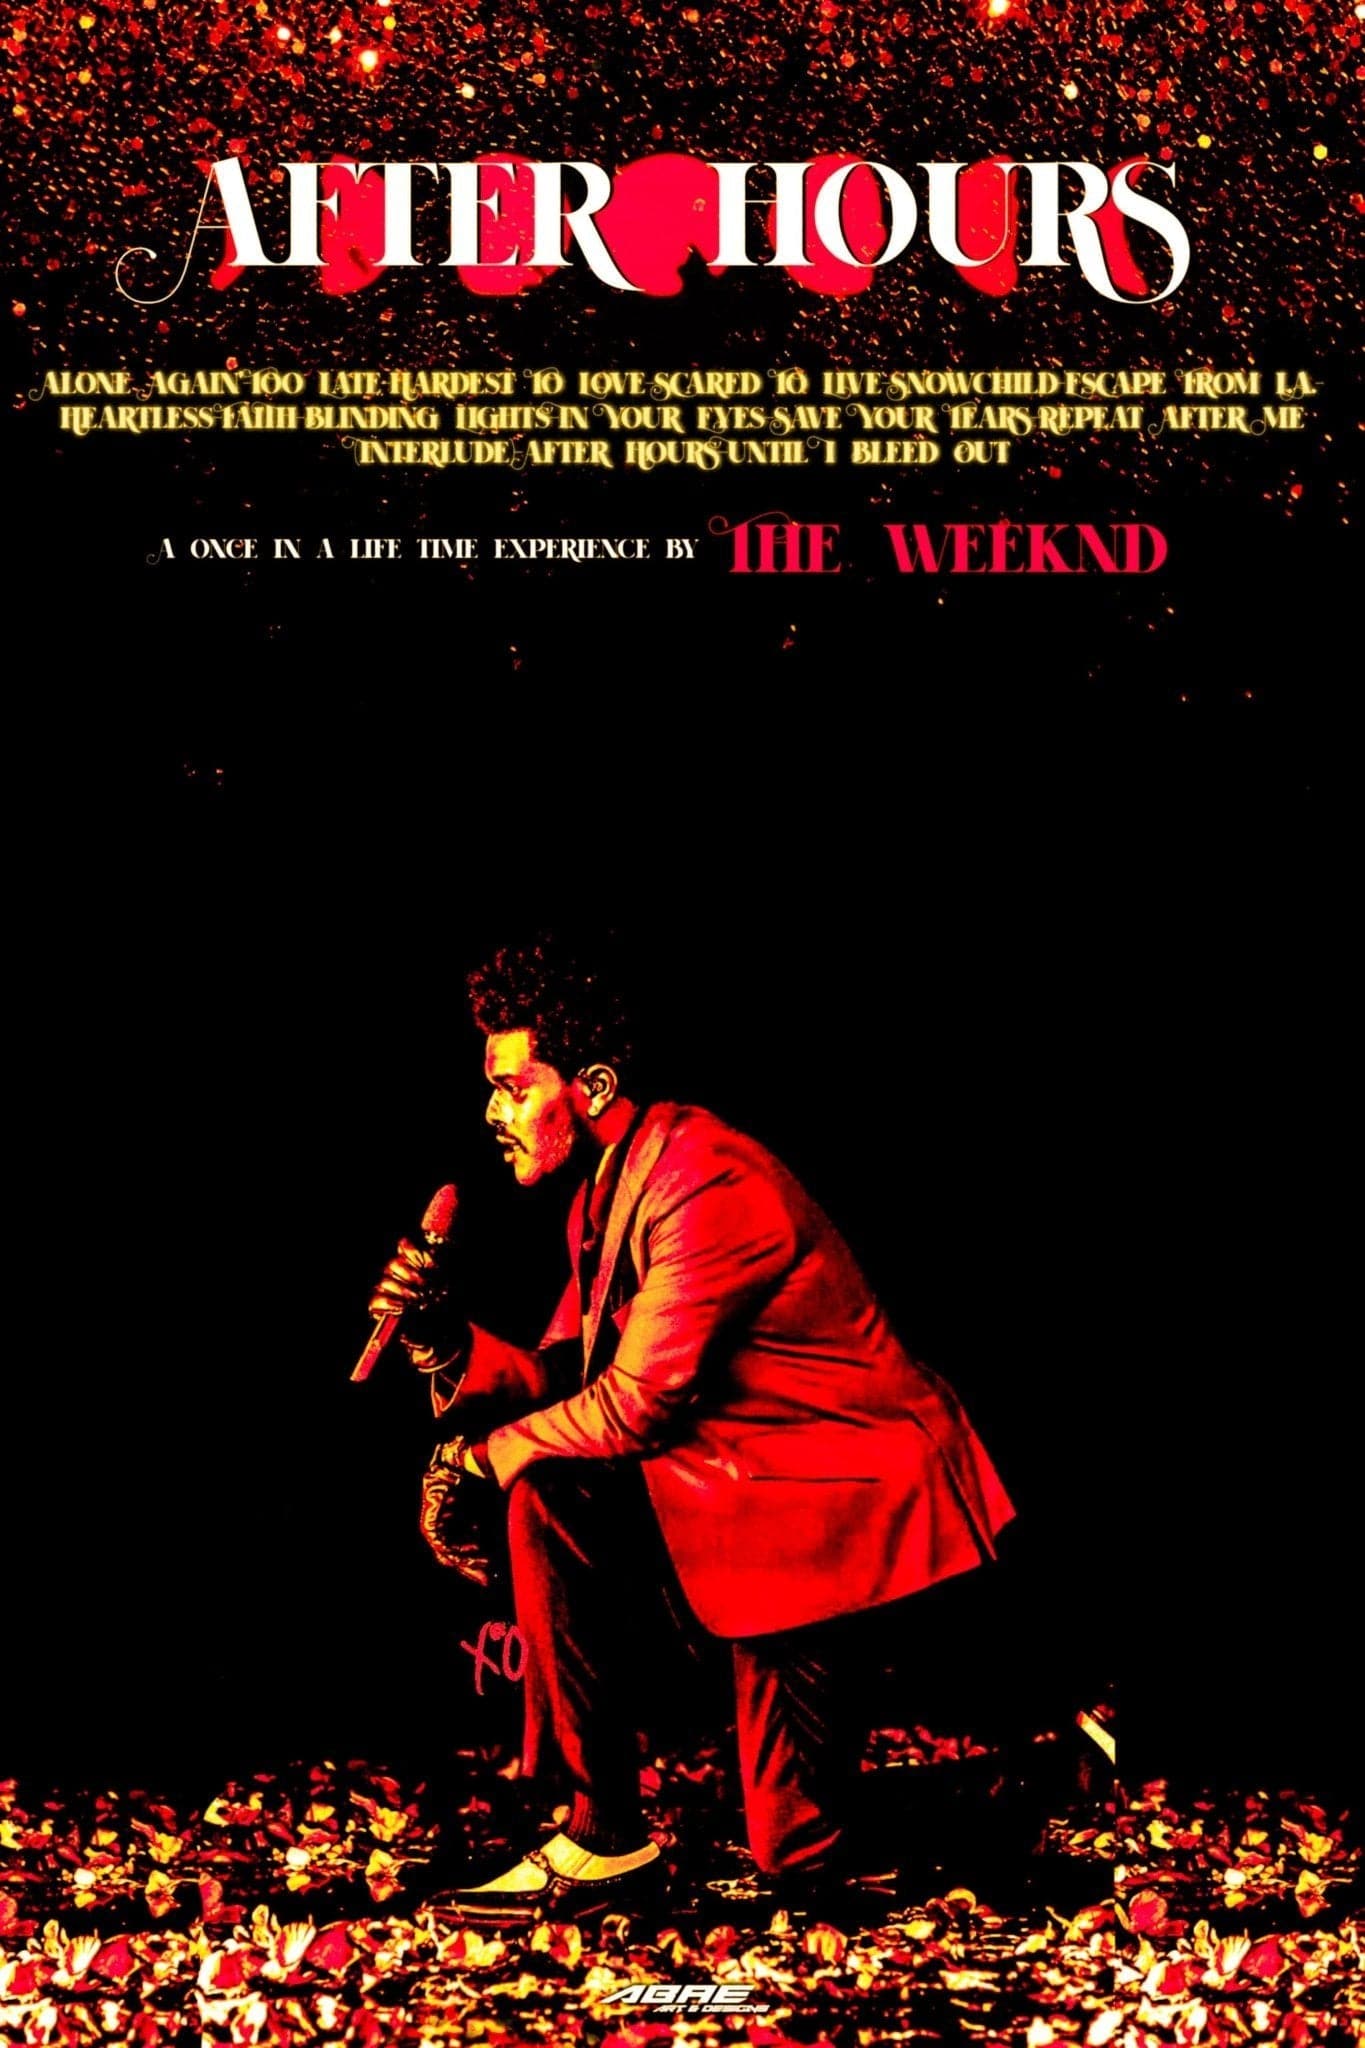 The Weeknd 'Once In A Life Time Experience' Poster – Posters Plug